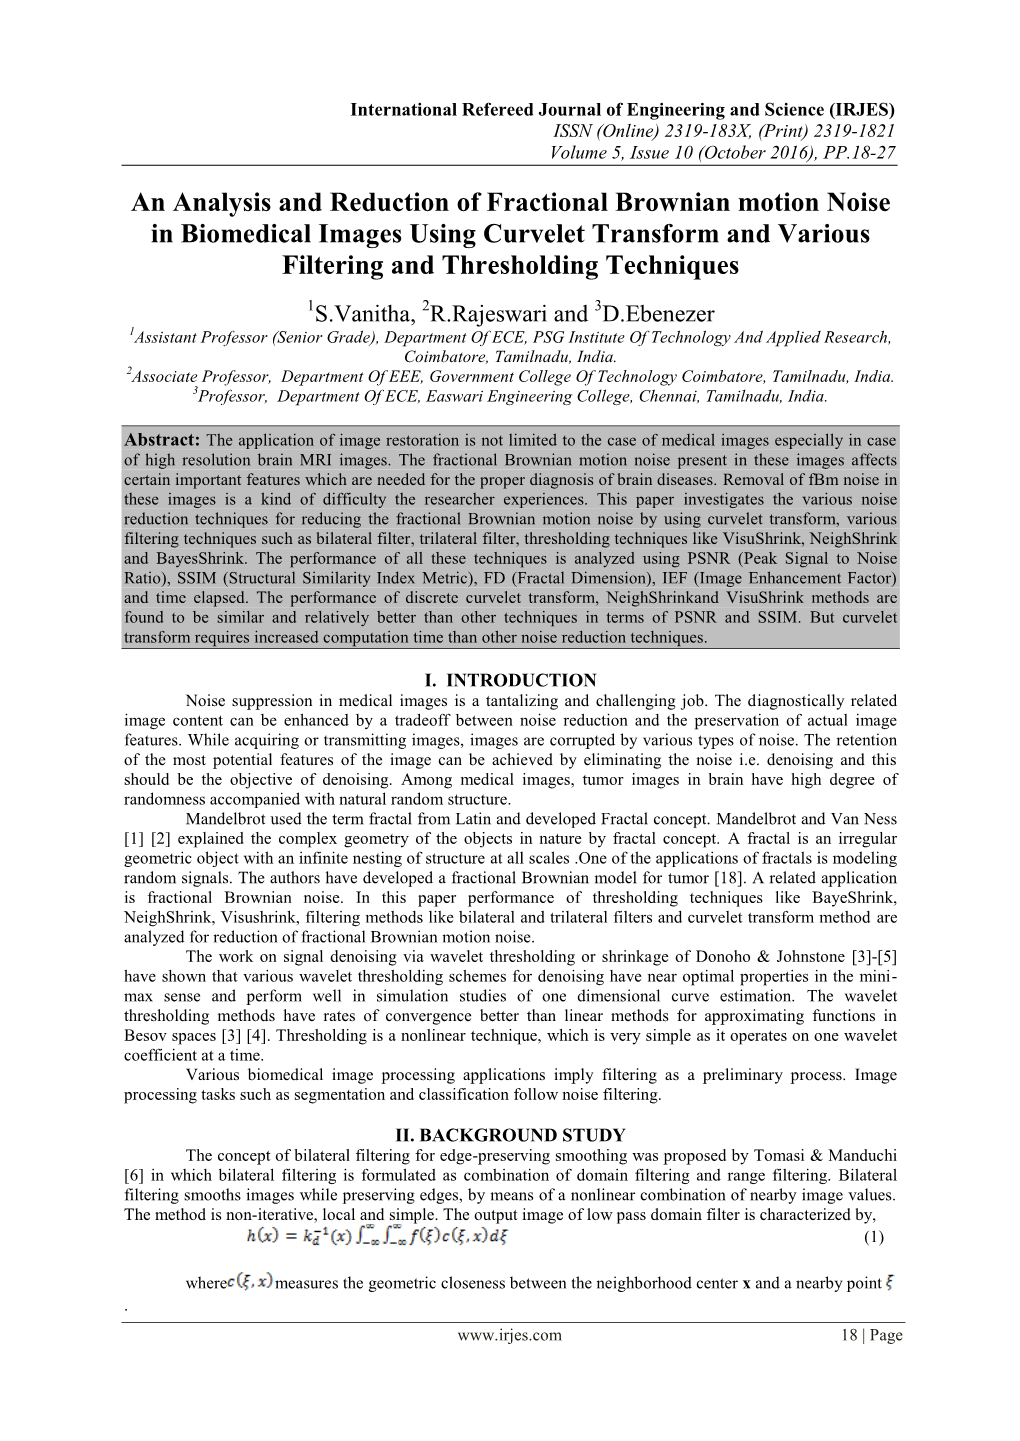 An Analysis and Reduction of Fractional Brownian Motion Noise in Biomedical Images Using Curvelet Transform and Various Filtering and Thresholding Techniques